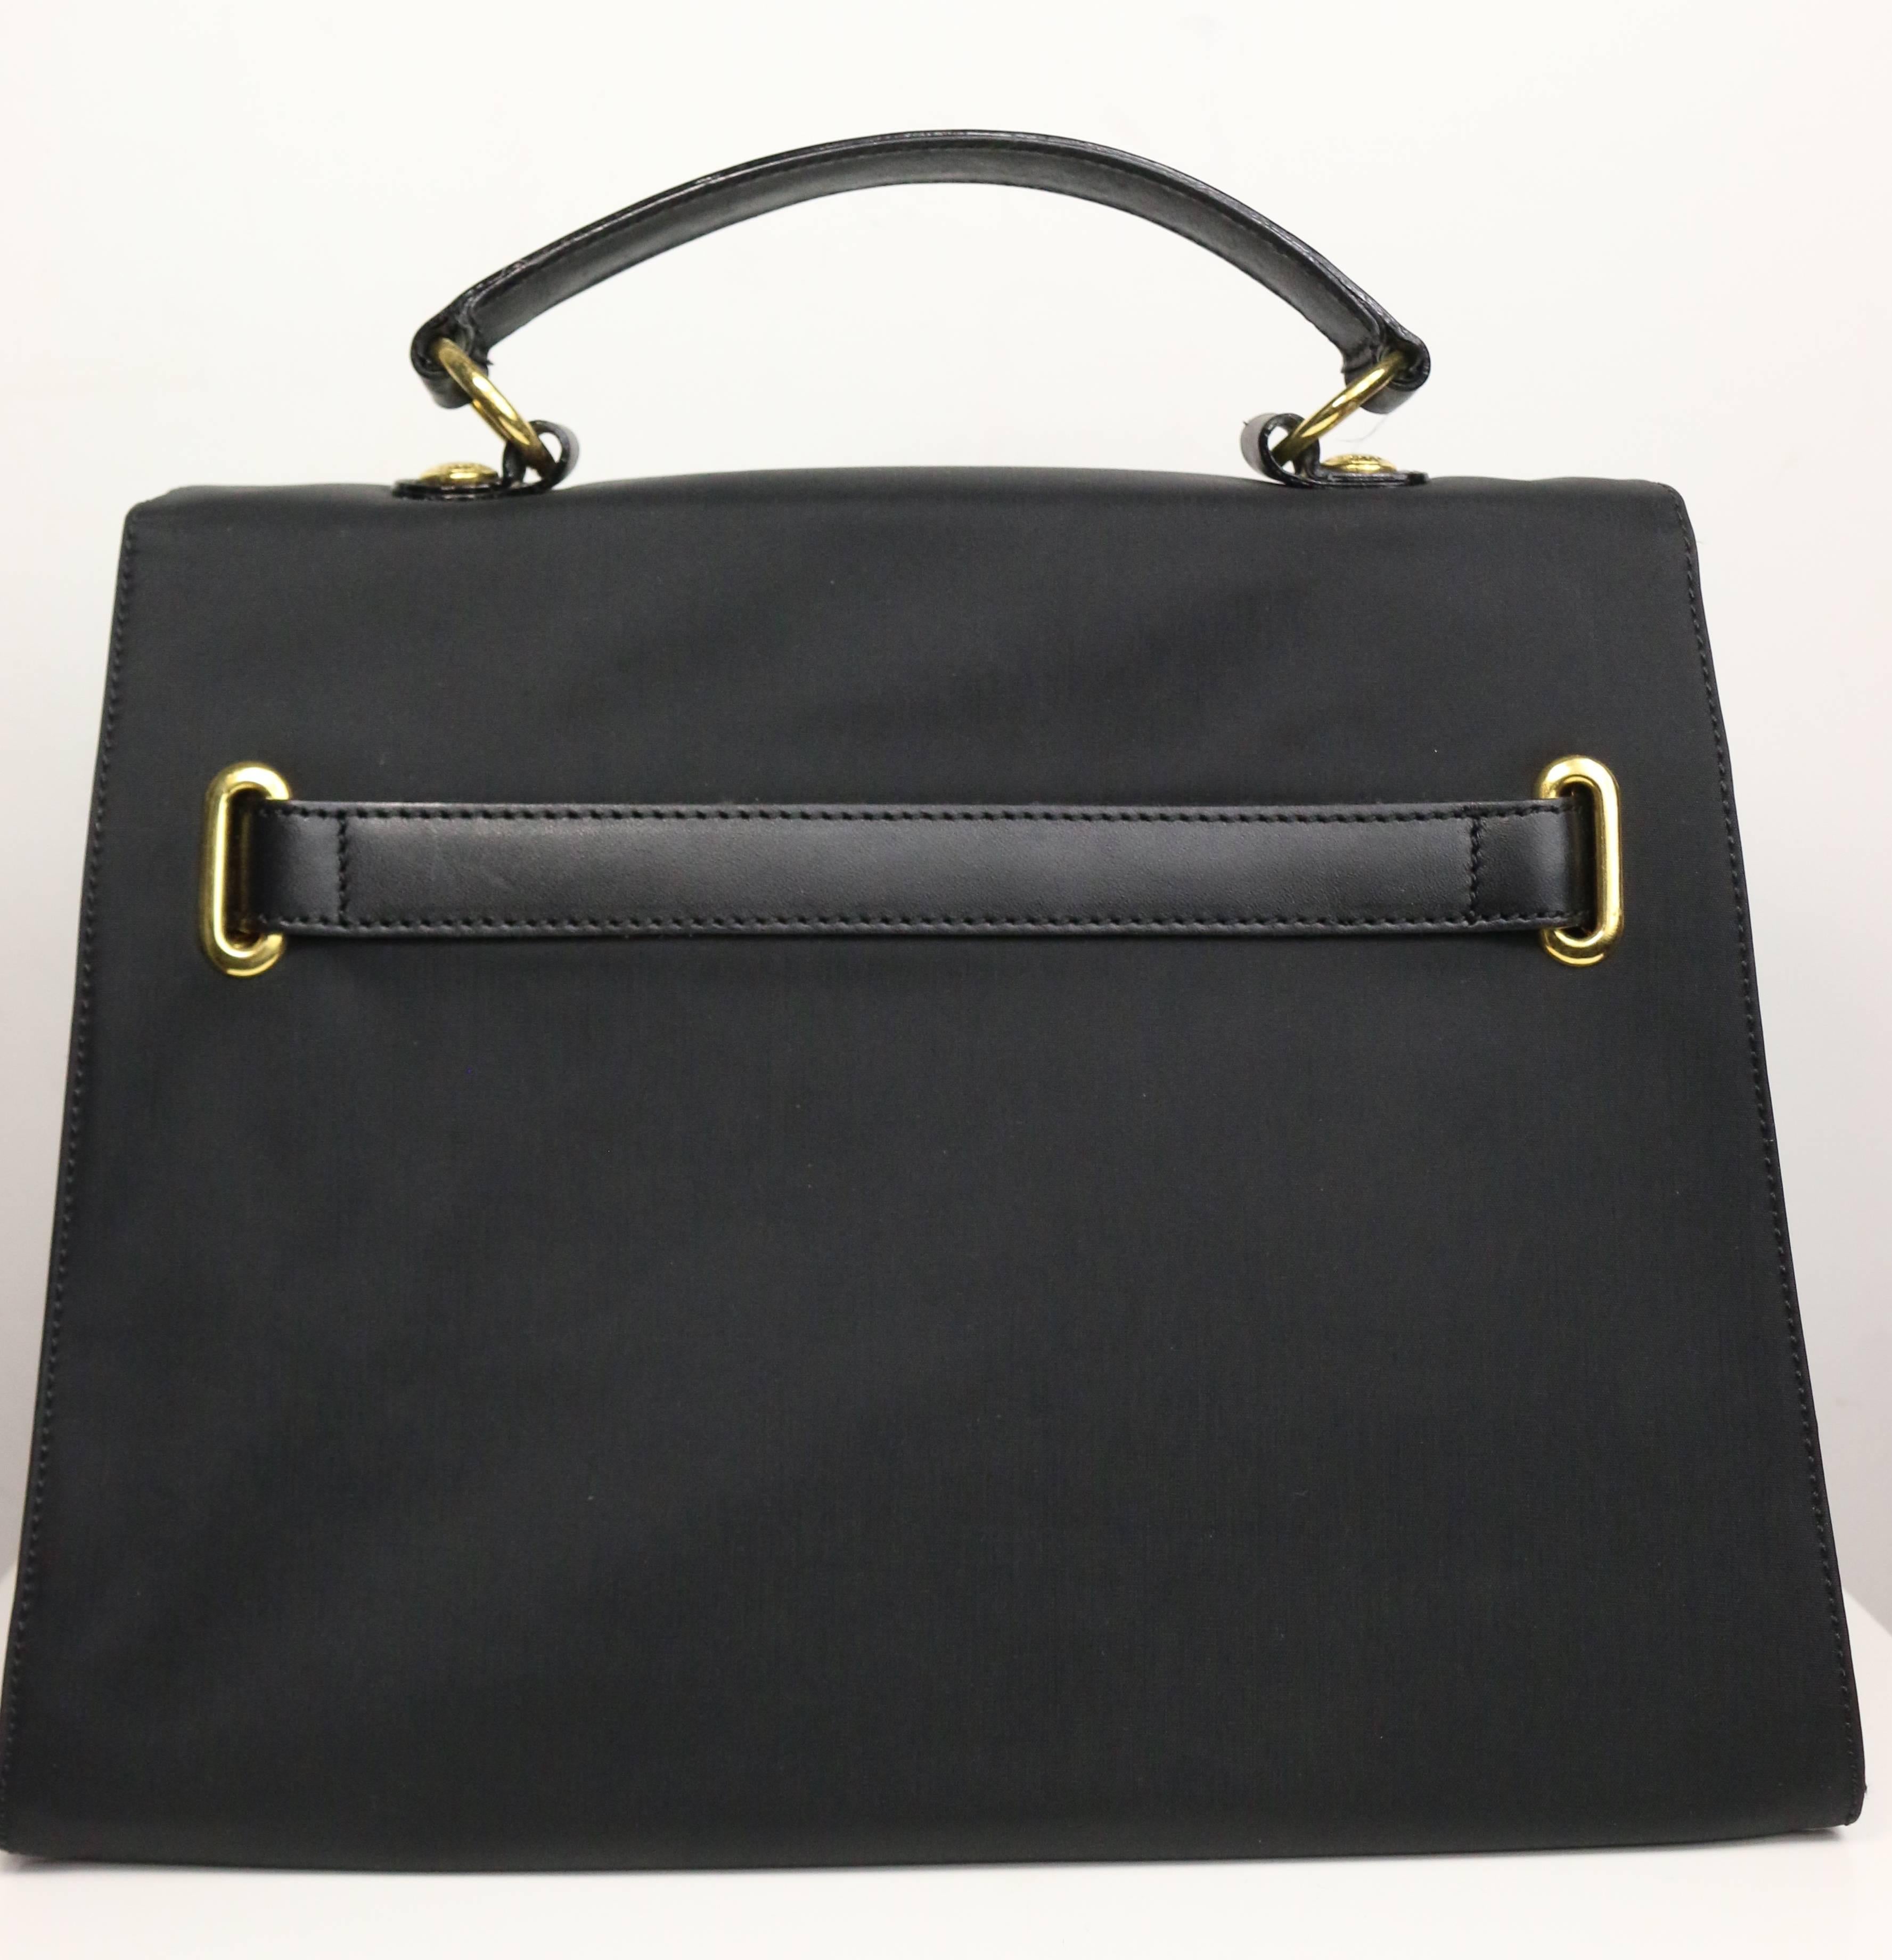 - Vintage 90s Moschino black nylon kelly style bag. This bag is made in Italy by RedWall. Featuring a gold hardware interlock closure, black leather handle and interior 